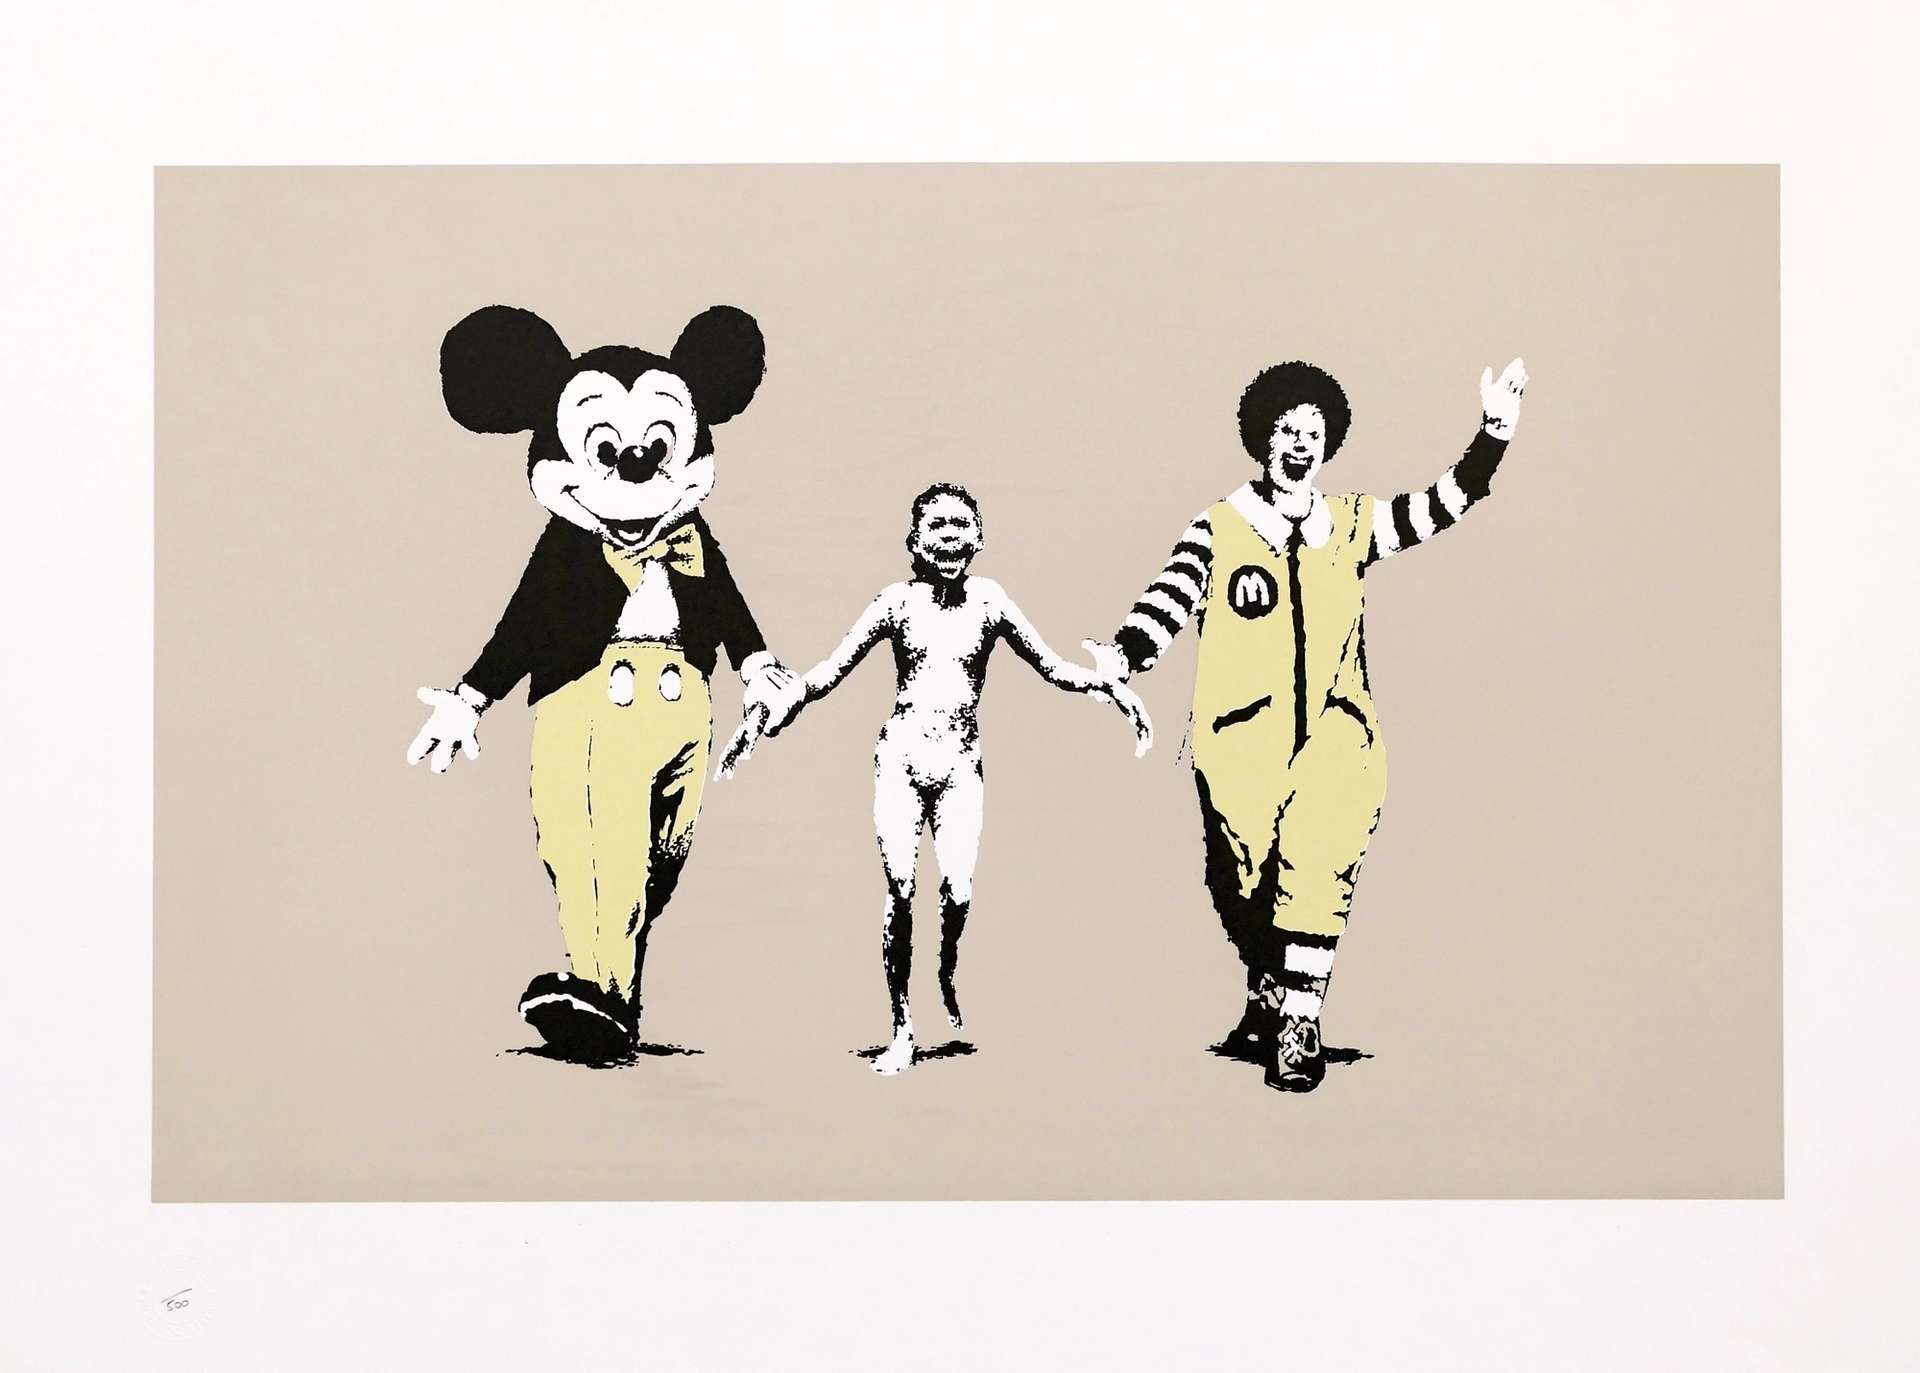 Napalm by Banksy